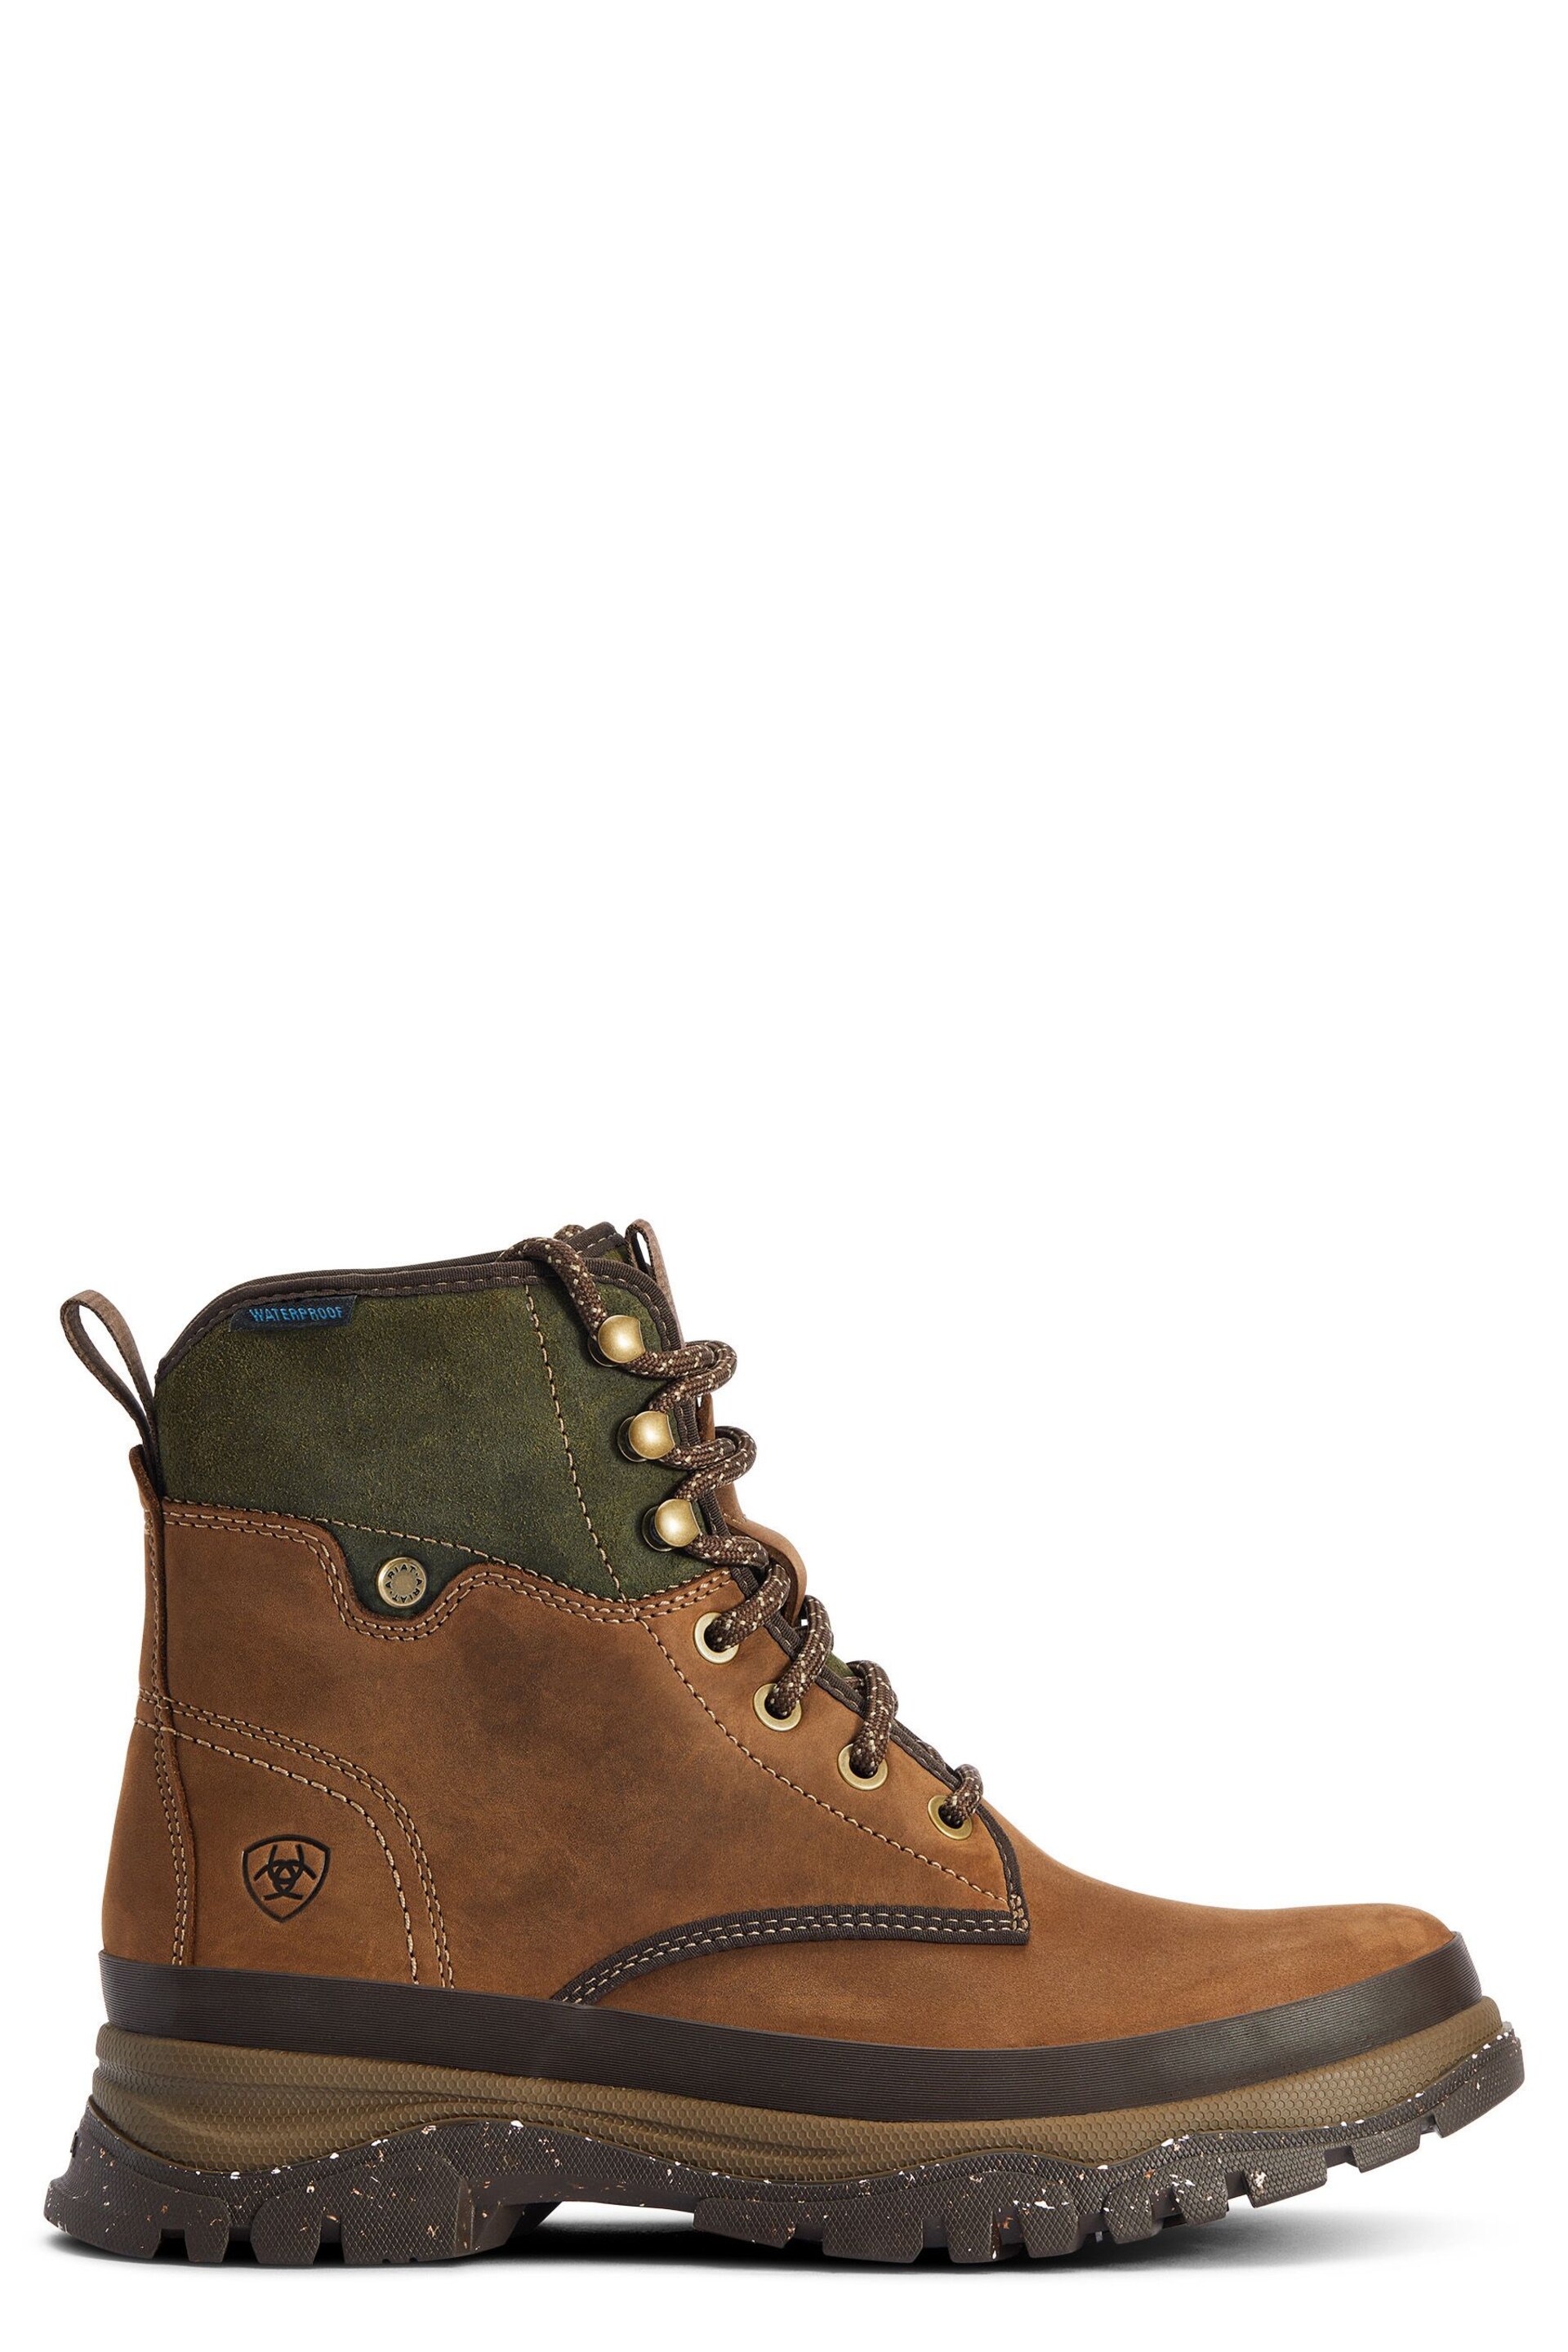 Ariat Moresby Brown Short Boots - Image 1 of 6